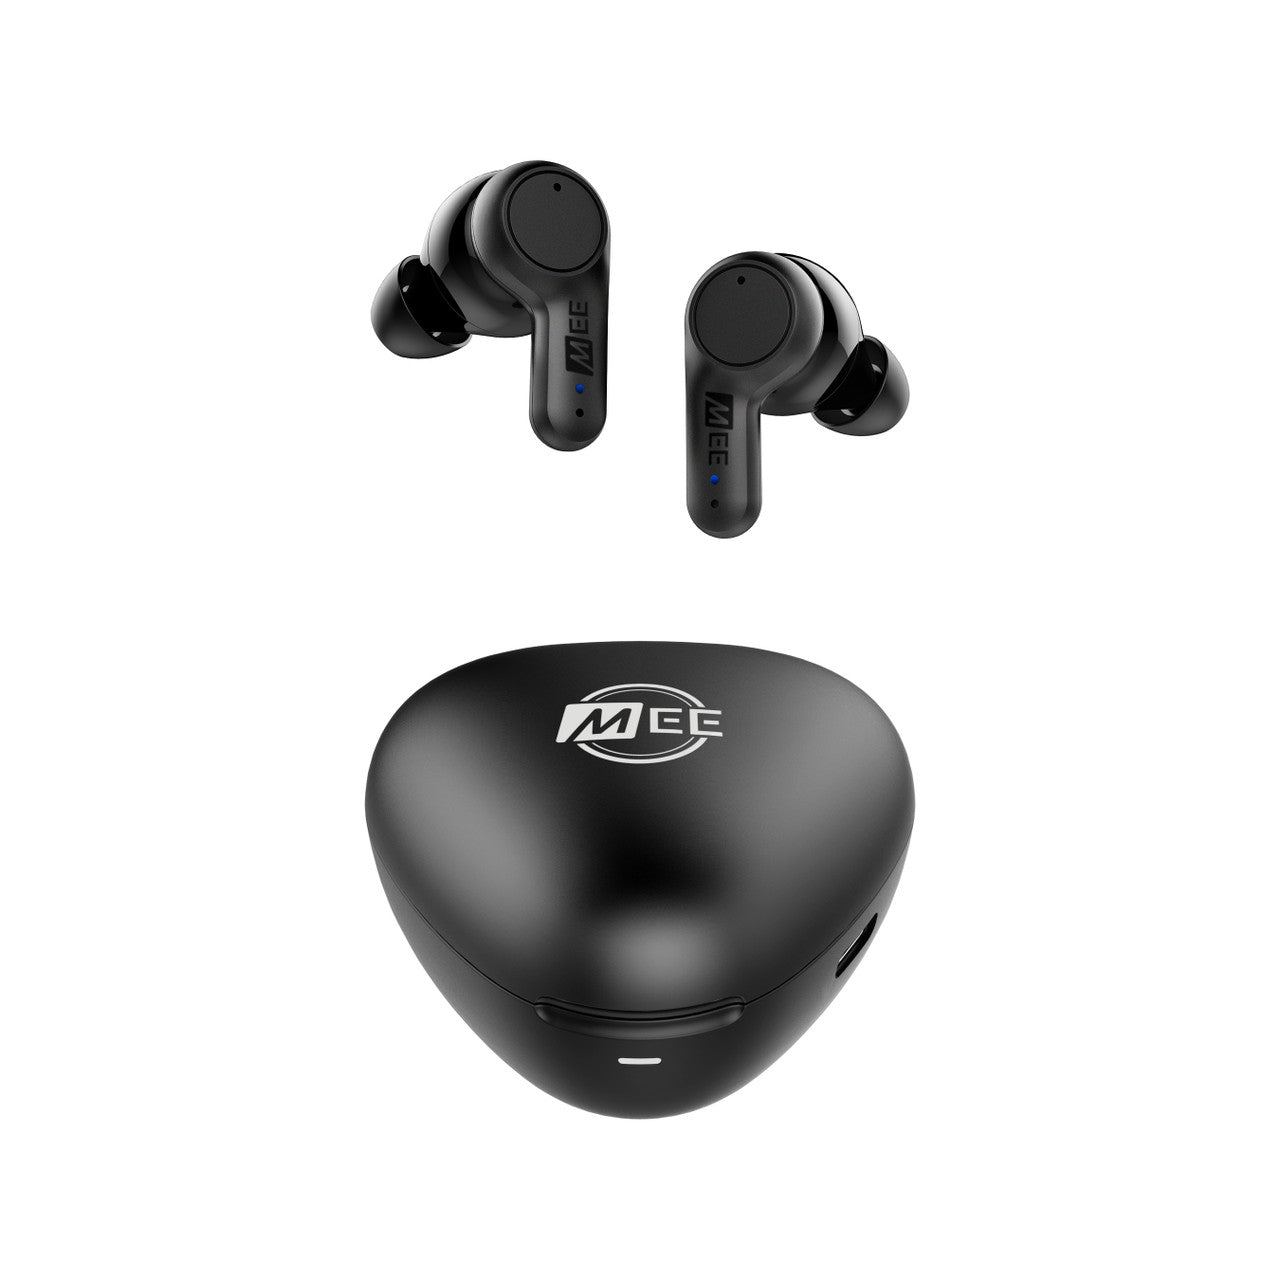 Image of X20 Truly Wireless Active Noise Canceling In-Ear Headphones.